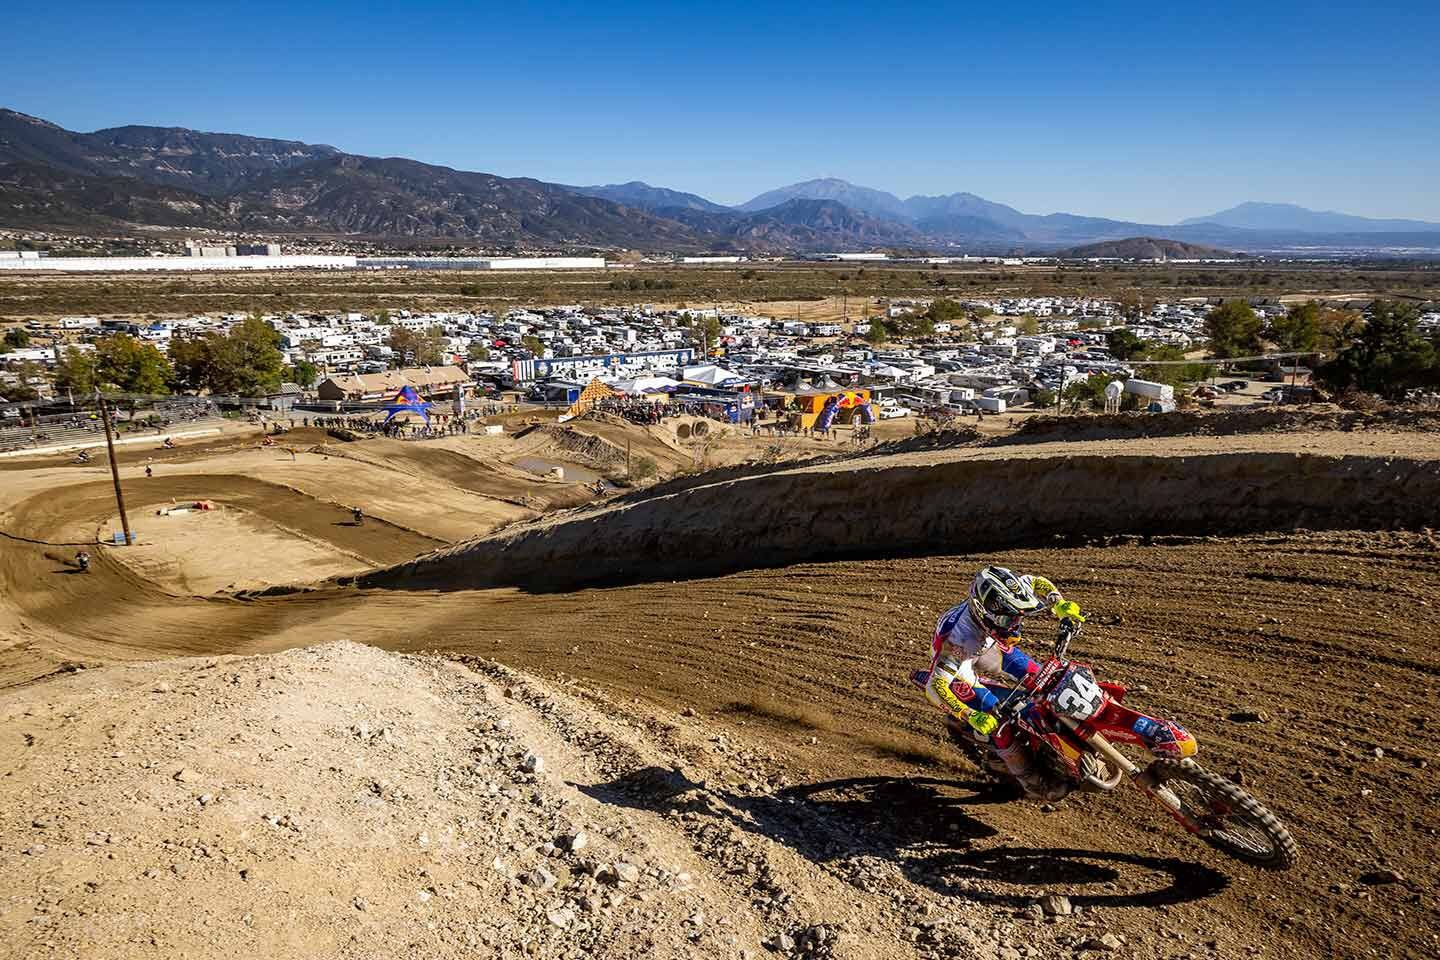 Newly signed GasGas Supercross racer Ryder DiFrancesco competed Saturday on his MC 250F.